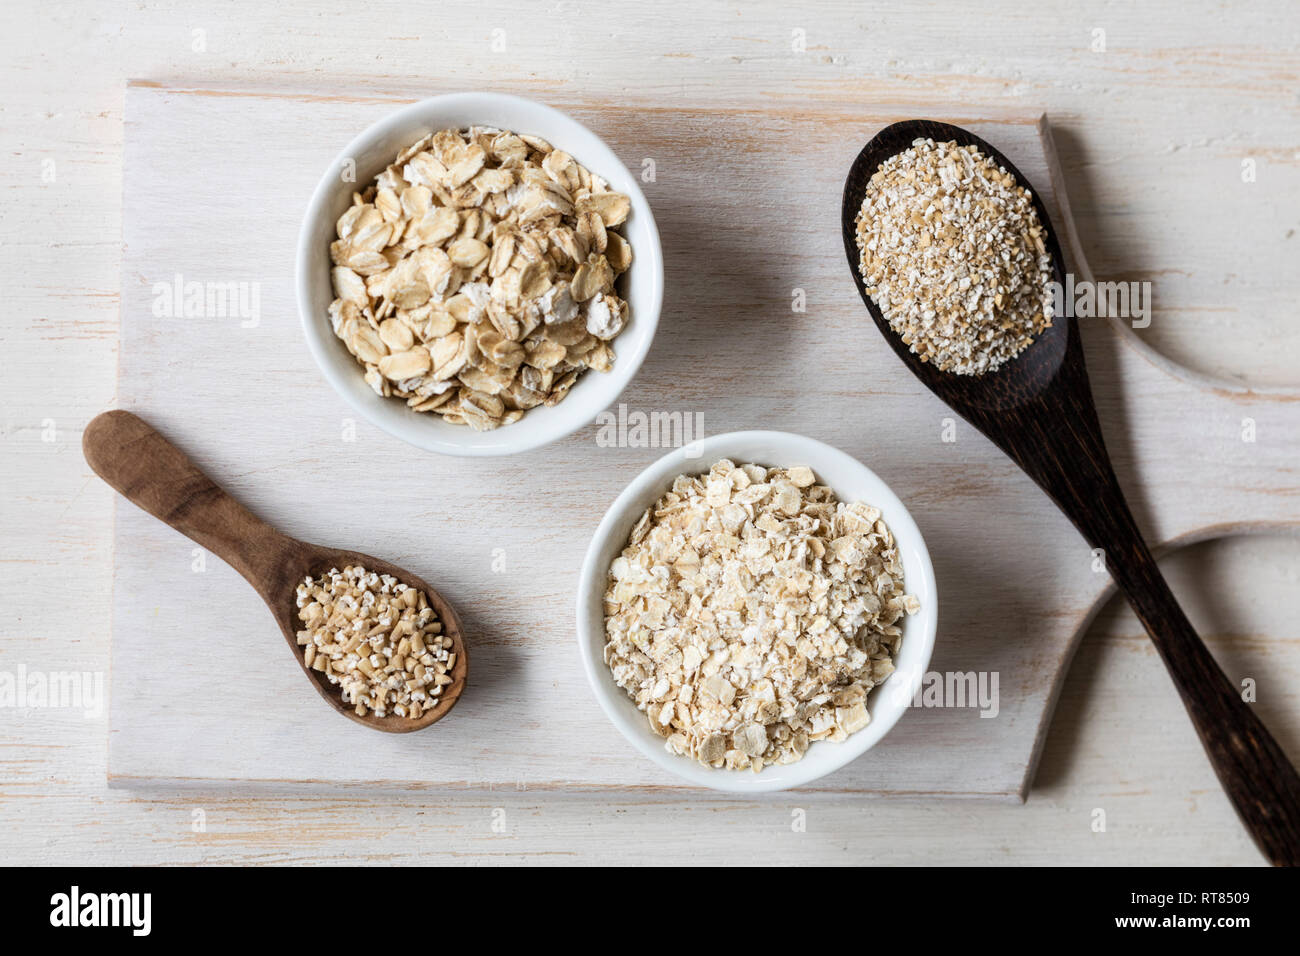 Two variations of oat flakes, oat bran and steel-cut oats Stock Photo